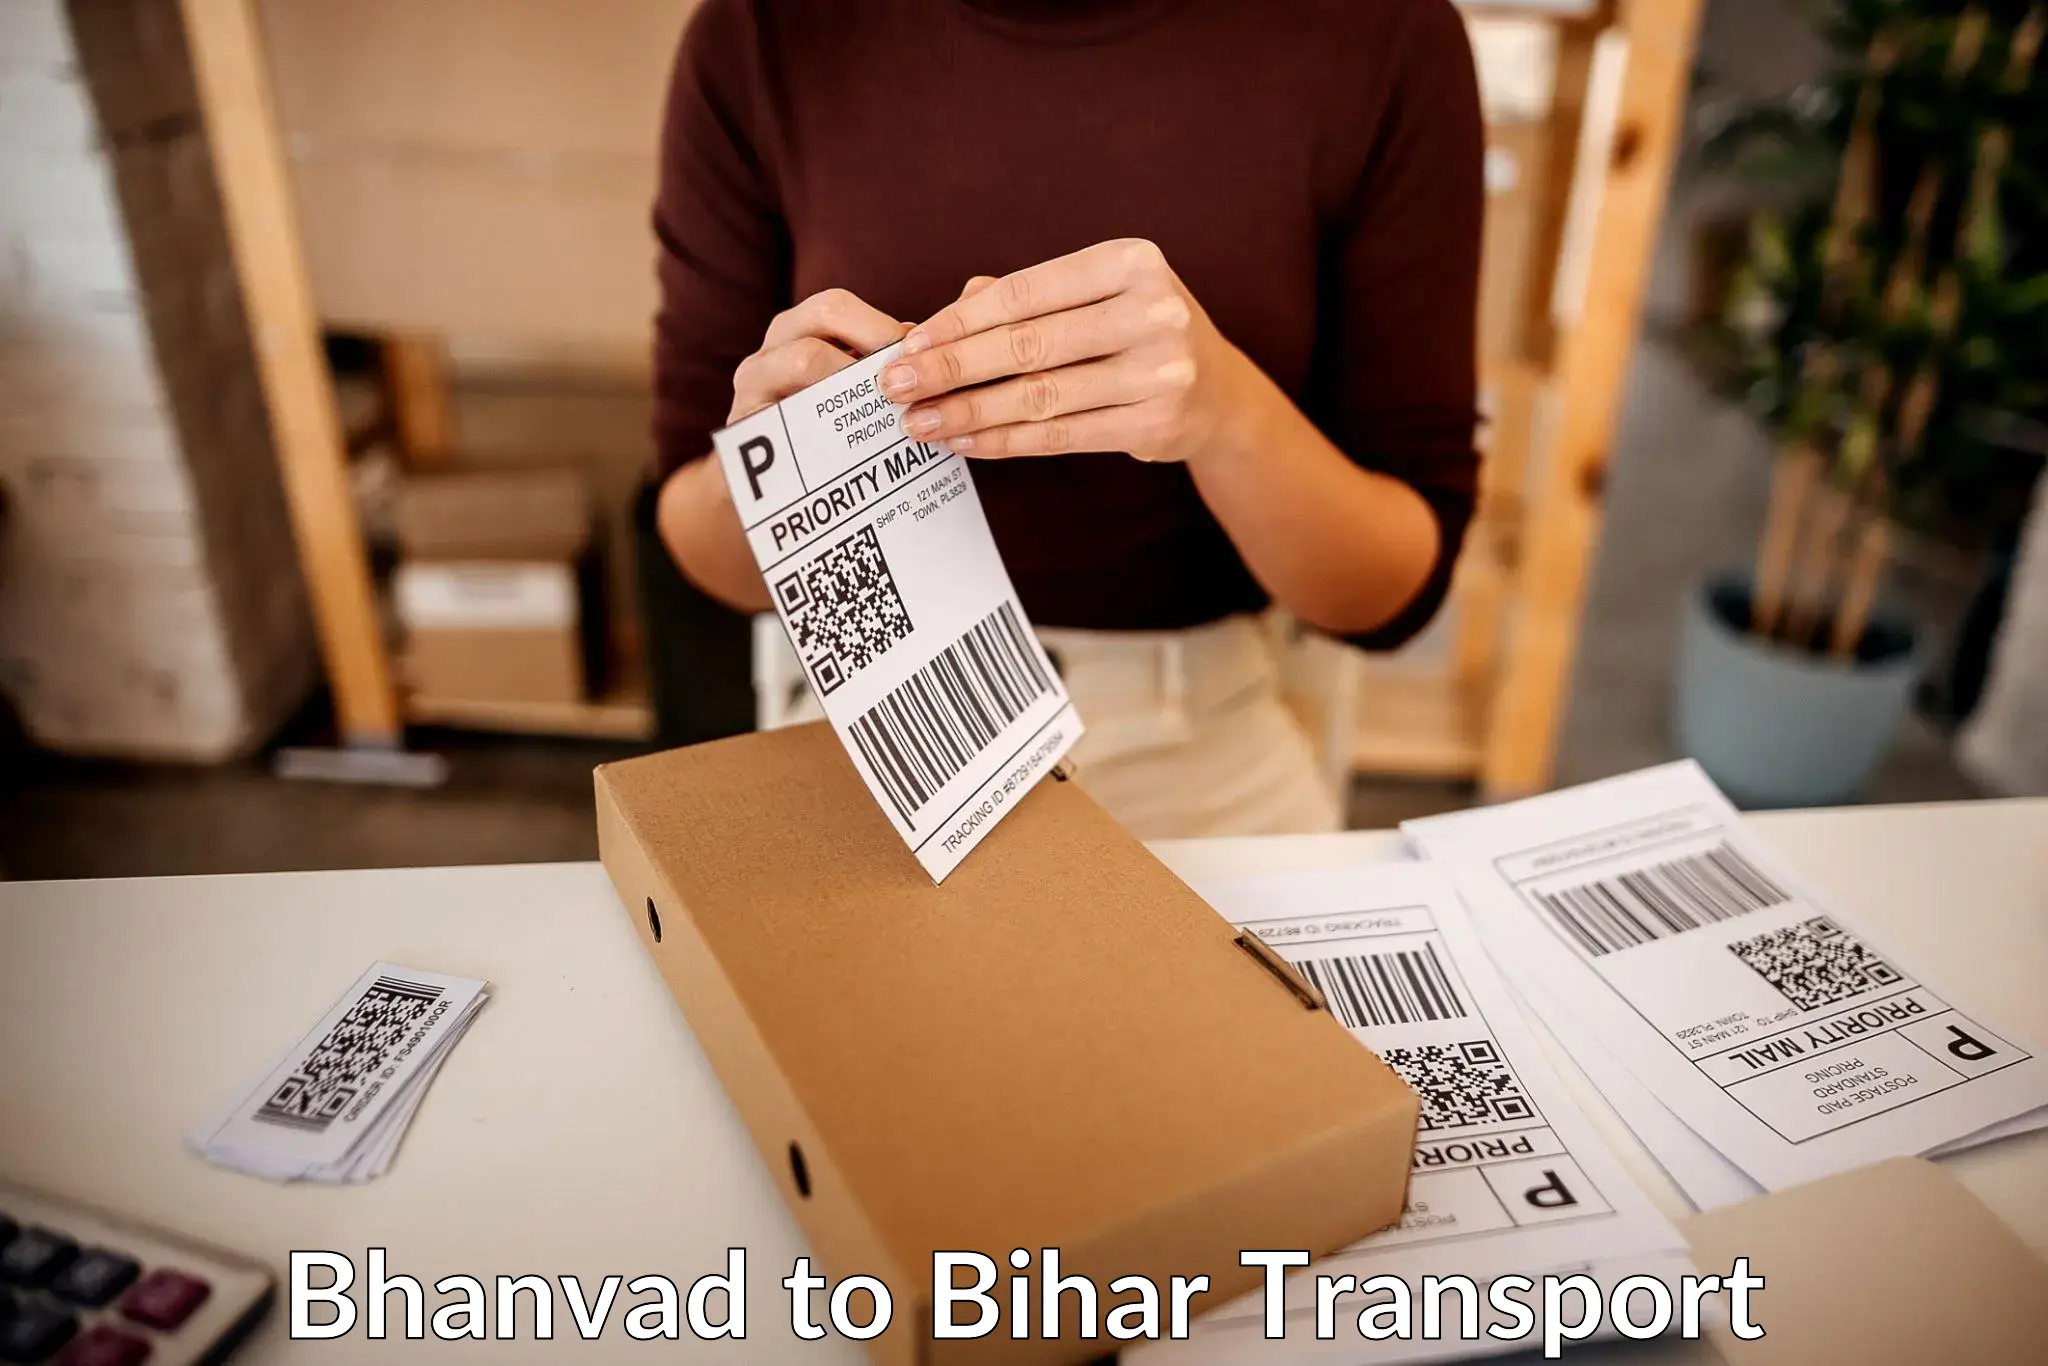 Shipping services in Bhanvad to Jagdishpur Bhojpur